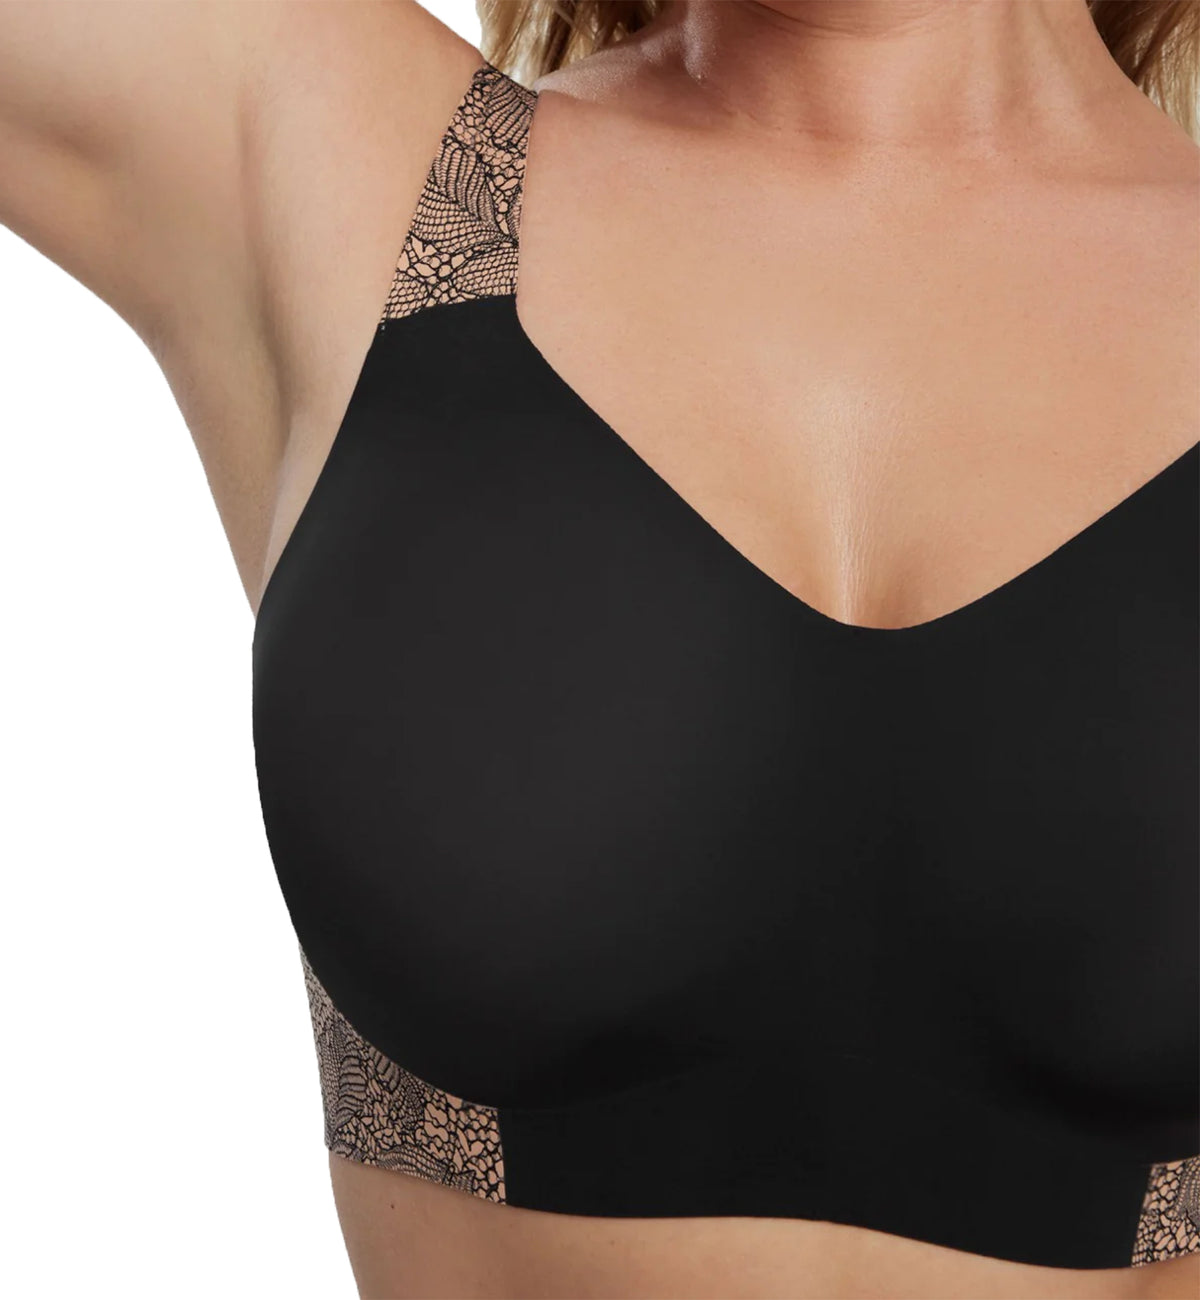 Evelyn &amp; Bobbie BEYOND Adjustable Bra (1732),Small,Black Lace - Black Lace,Small